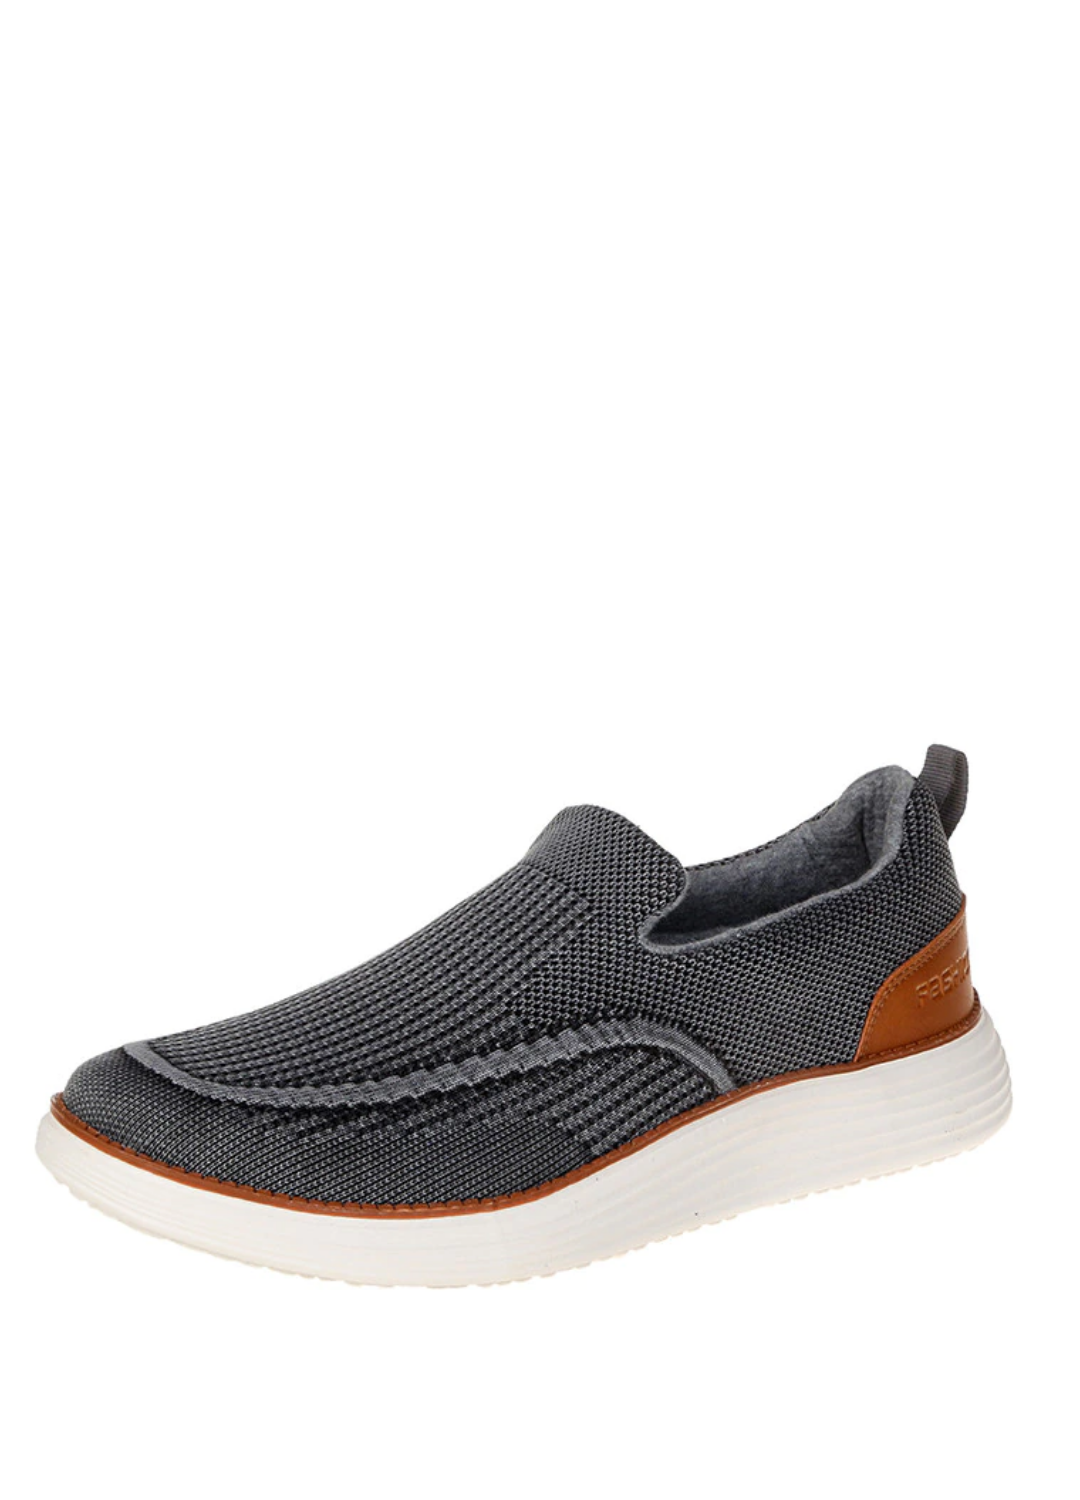 Gerson Men's Loafers Casual Shoes | Ultrasellershoes.com – USS® Shoes